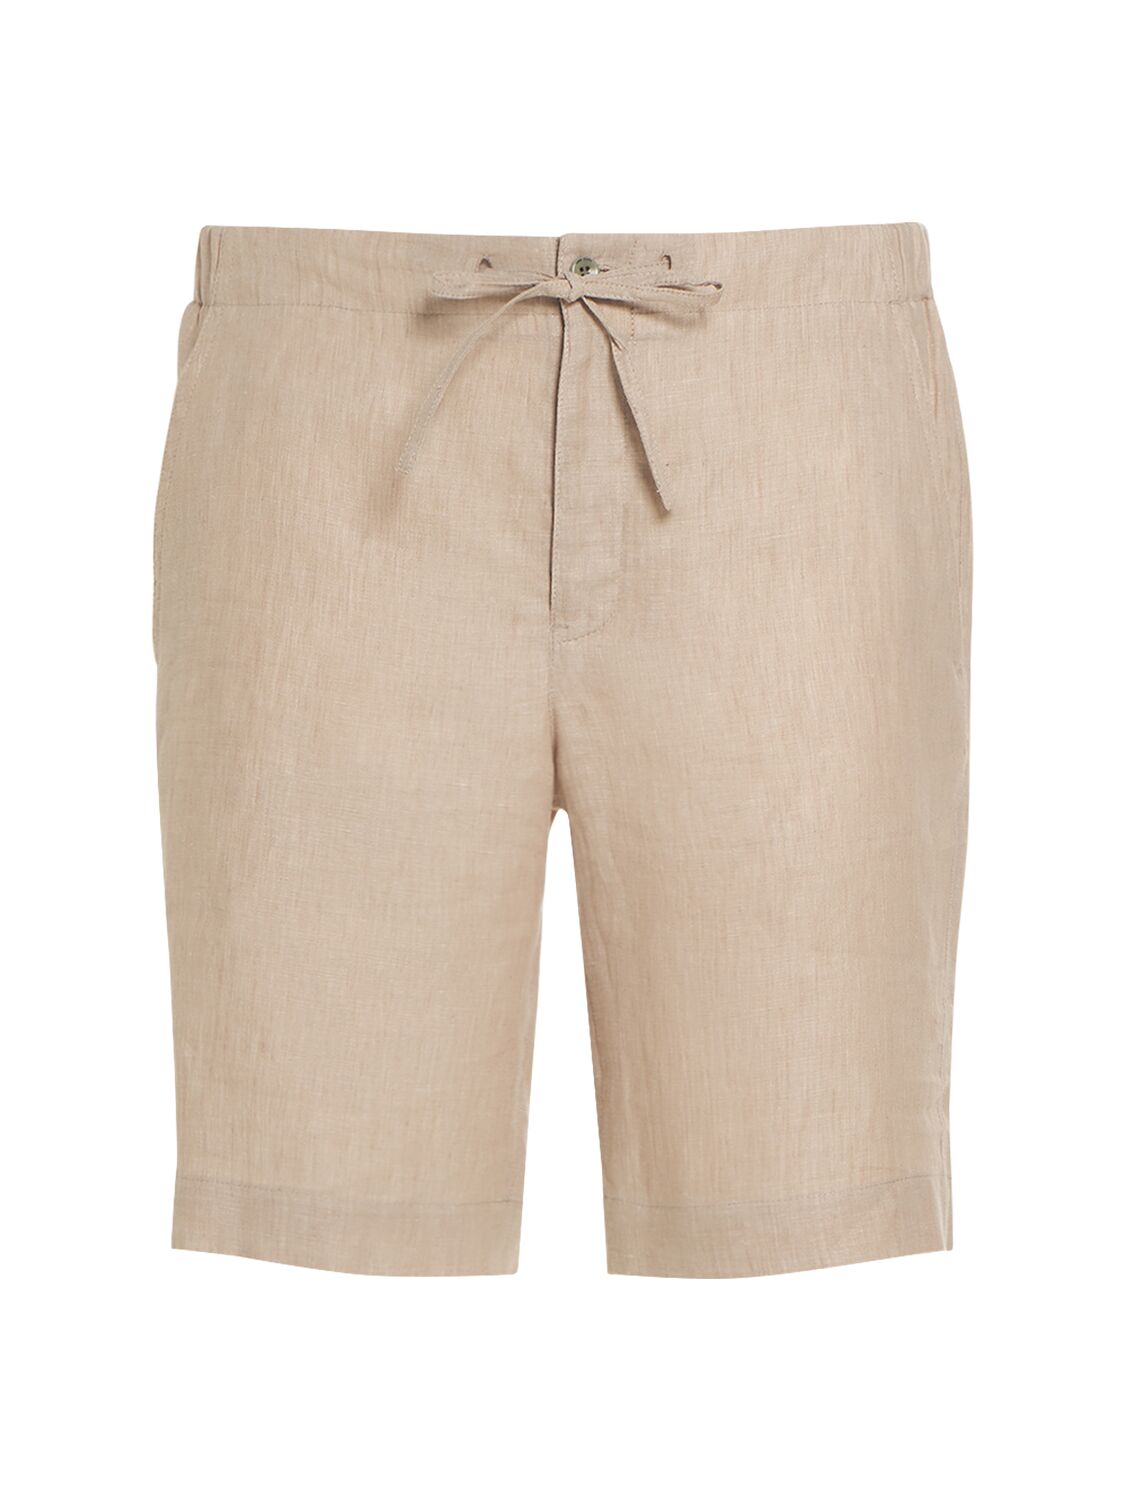 Image of Solaire Linen Shorts W/ Drawstring